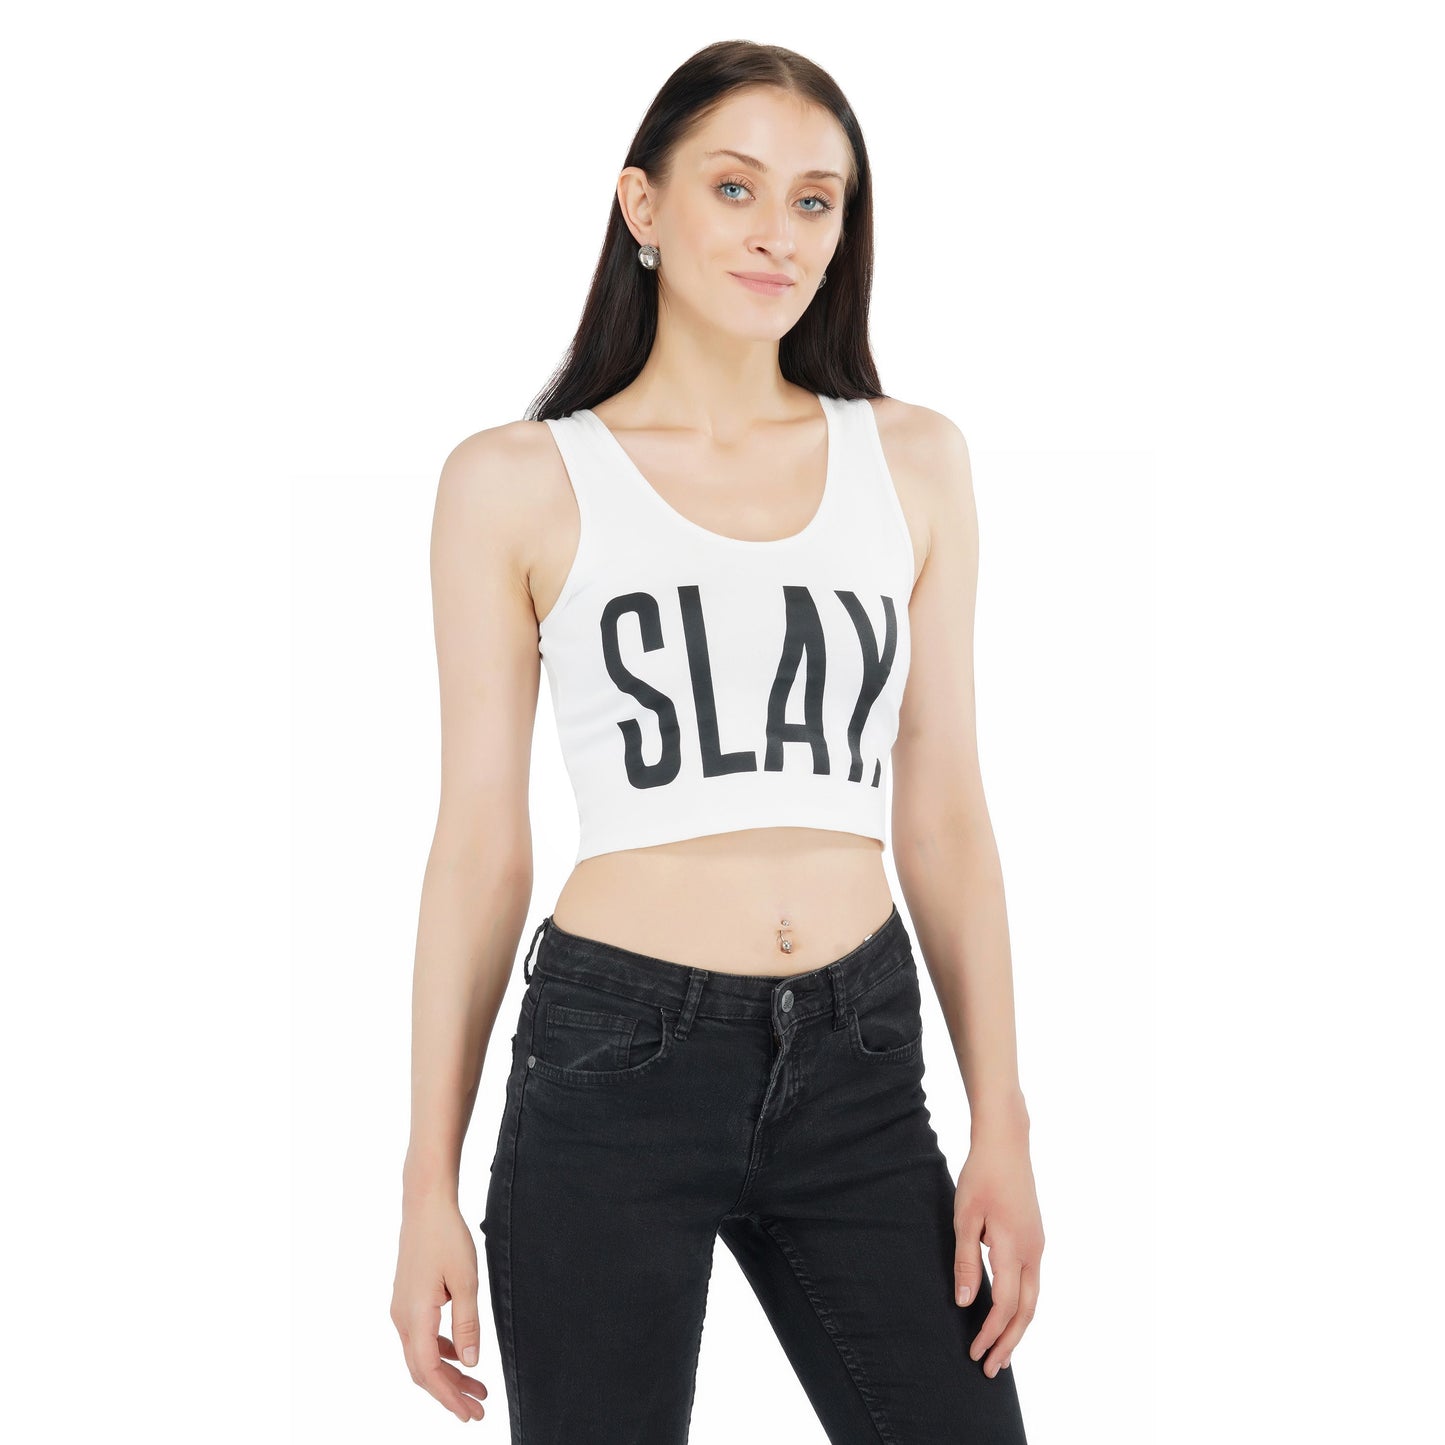 SLAY. Classic Women's Printed White Crop Top-clothing-to-slay.myshopify.com-Top